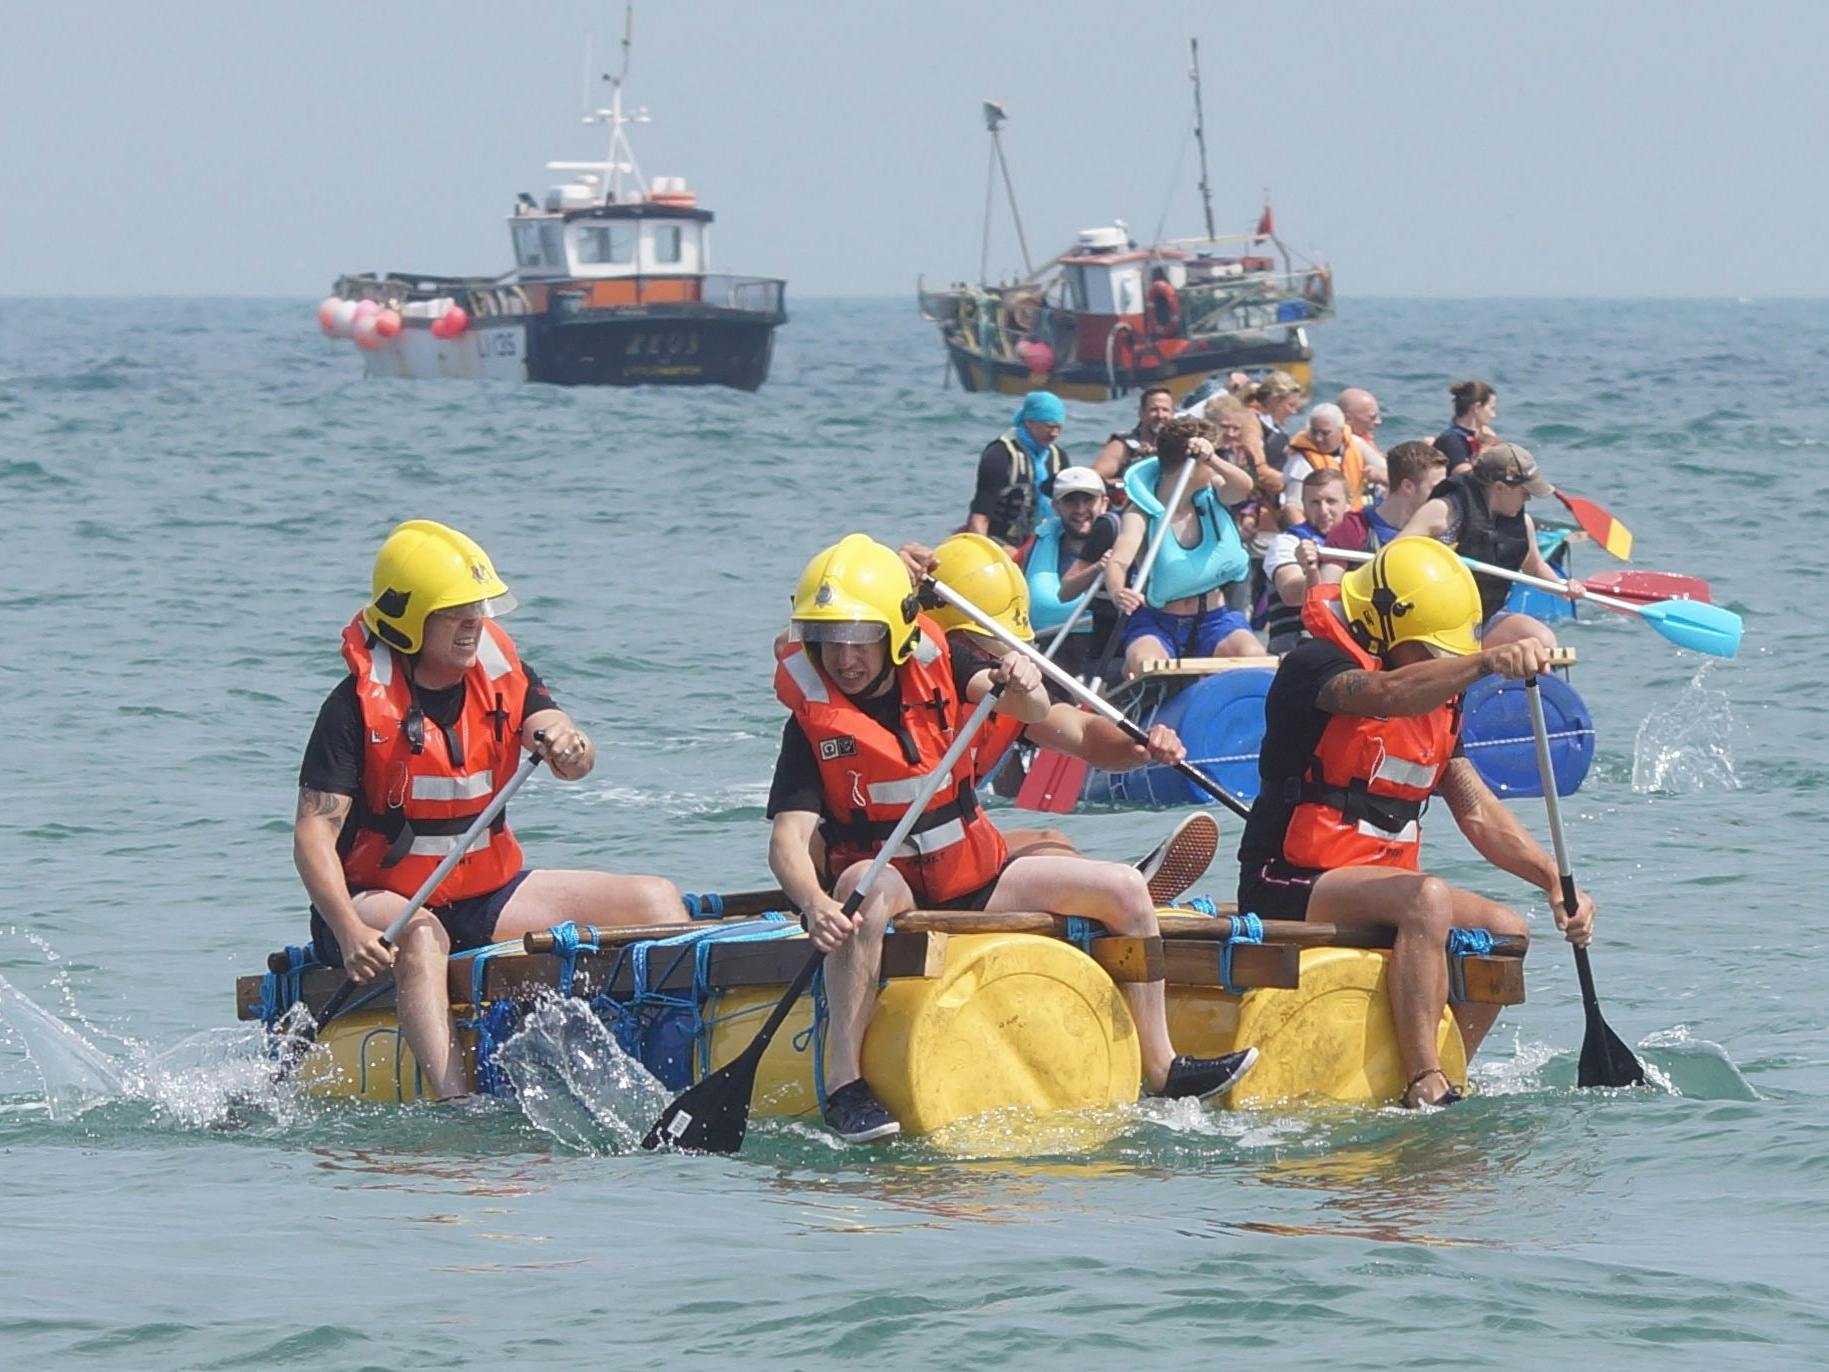 Taking part in a raft race on lifeboat day in Selsey